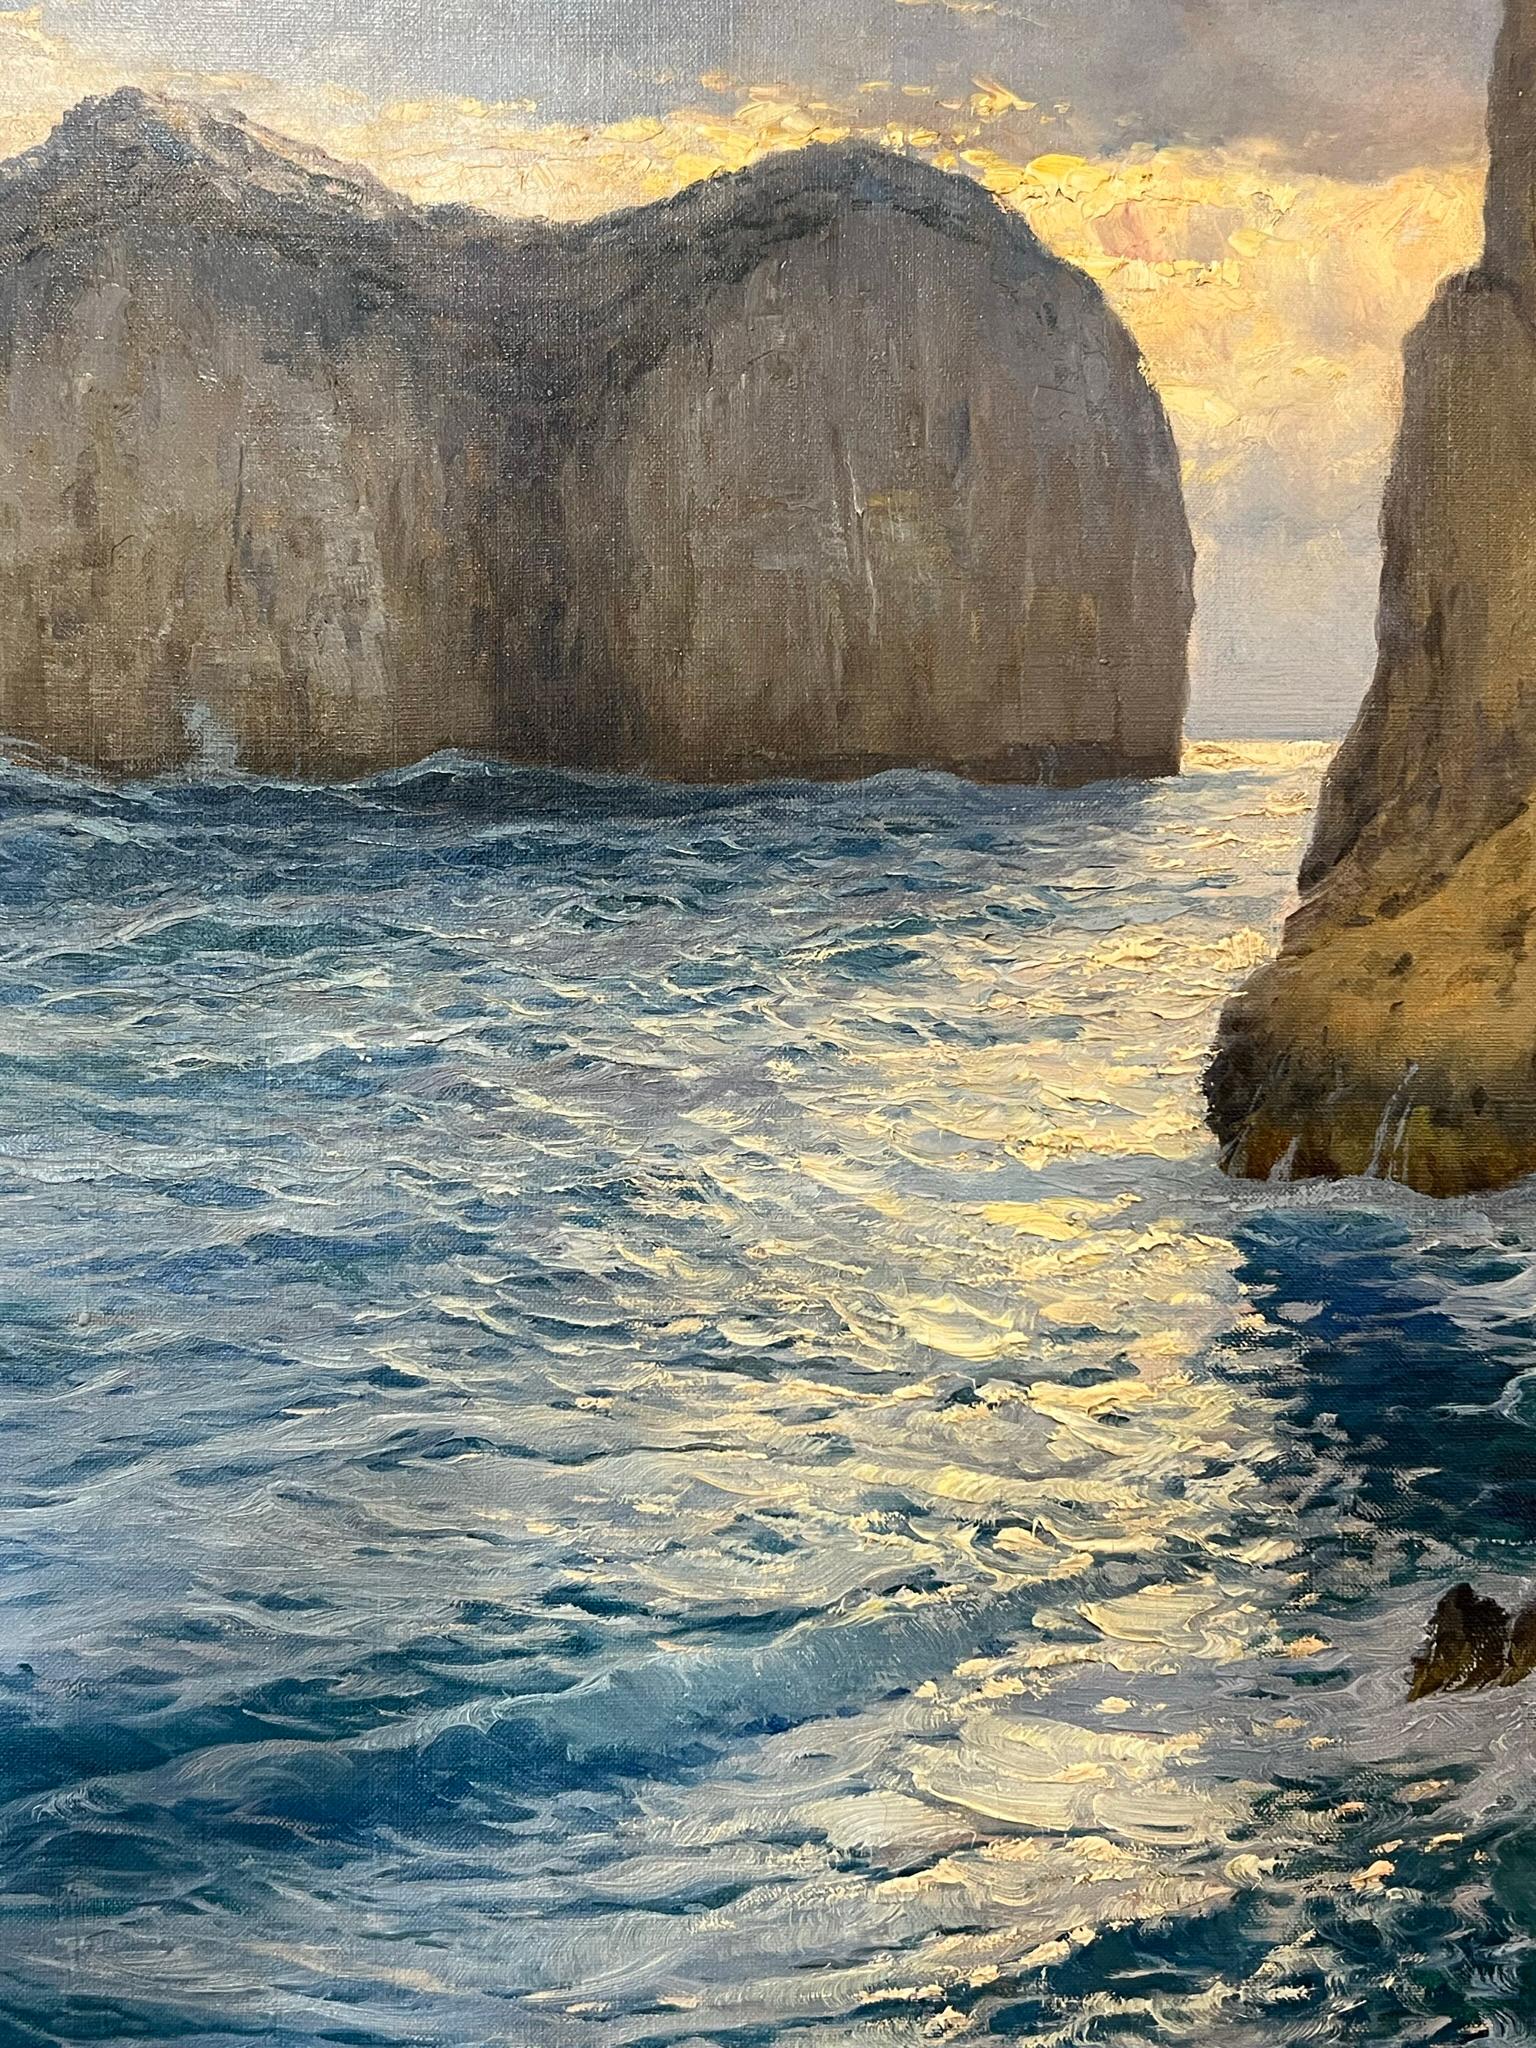 Original Monumental oil painting by Italian artist Cavalier Michele Federico (1884–1966) of a Capri coastline. This stunningly executed Italian coastline painting is one of Federico's frequent subjects. When you look closely, Federico renders